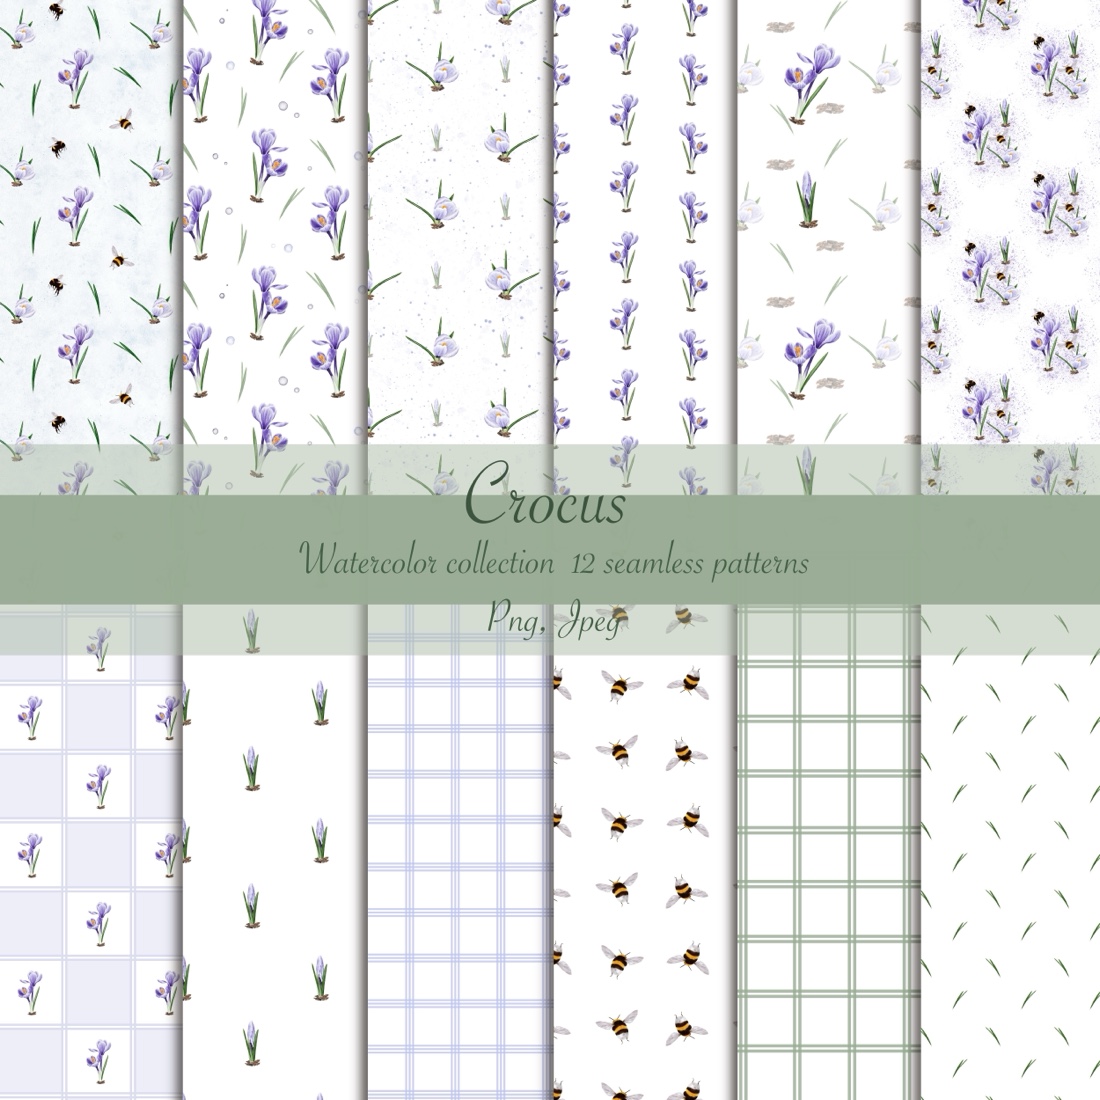 Watercolor collection seamless patterns Crocus cover image.